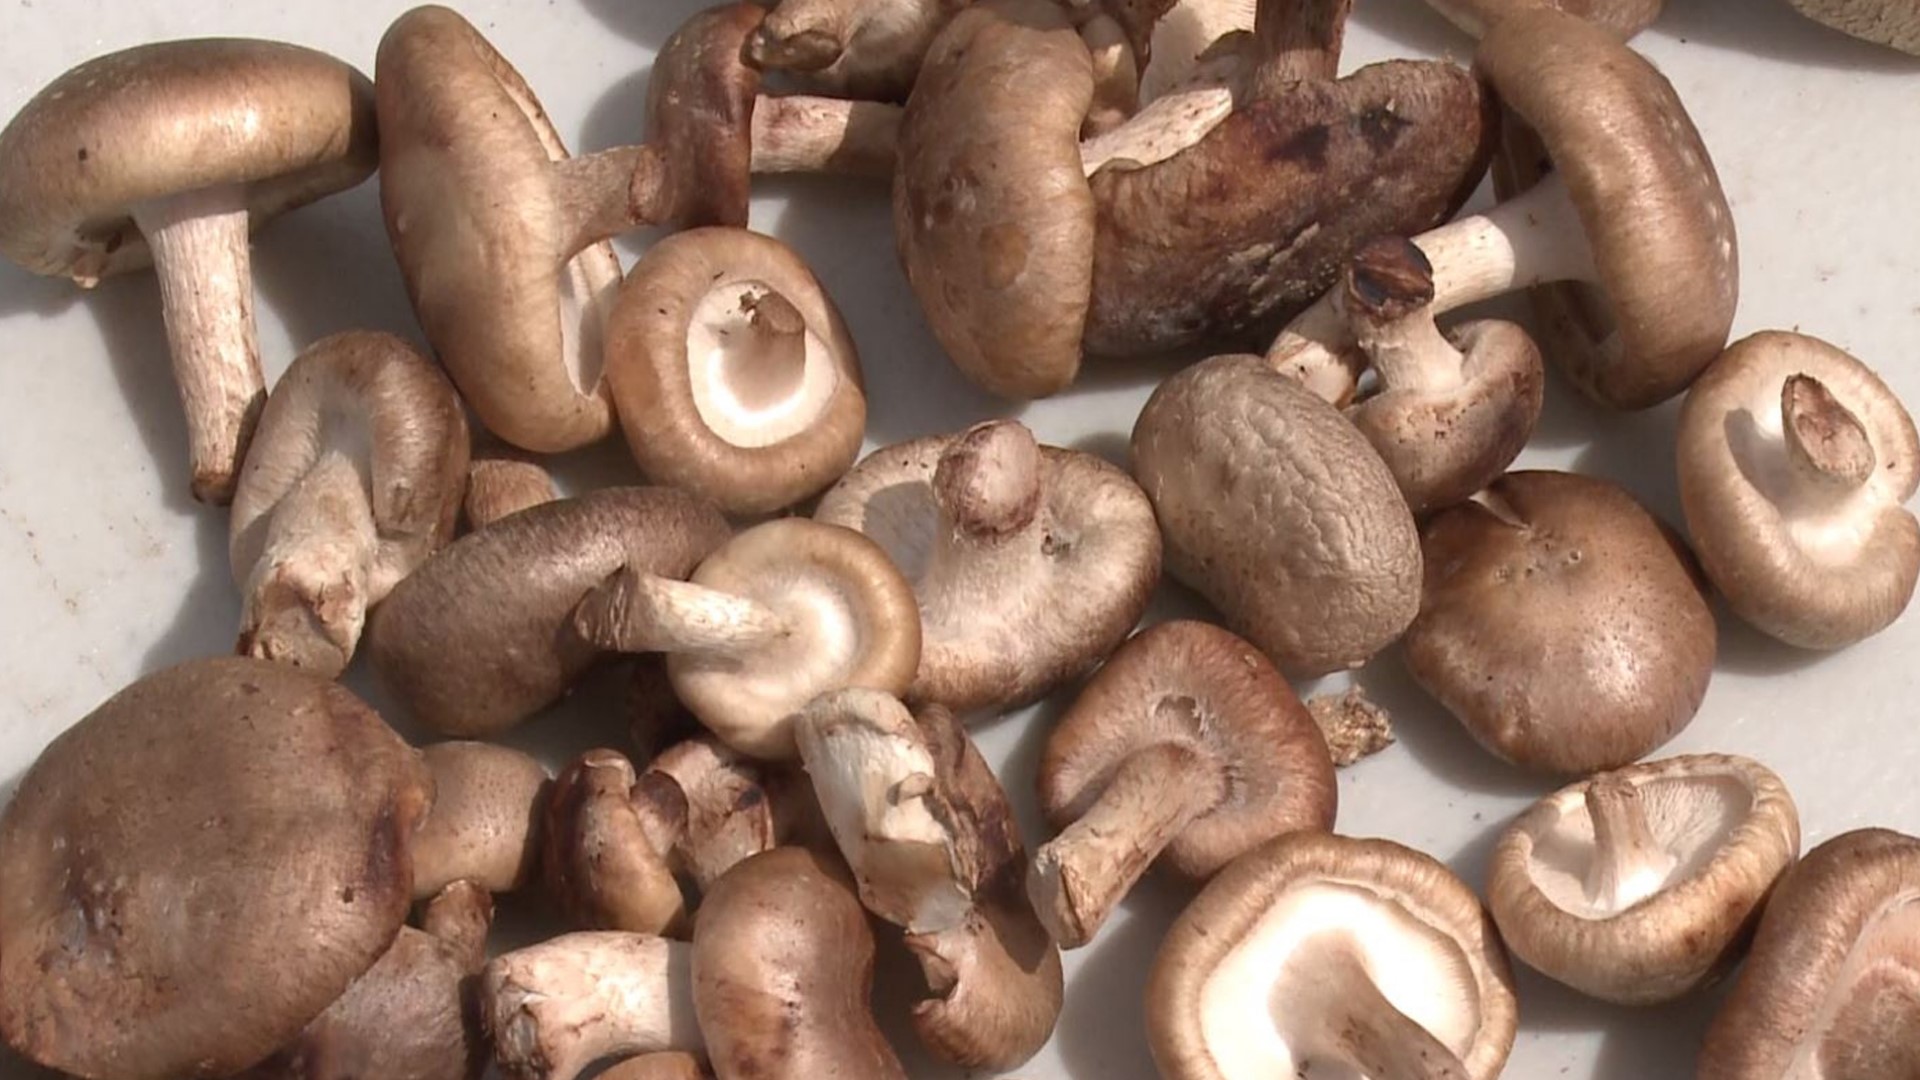 Growing mushrooms is easier than you think. Gardening with Gutner learns how from a mycologist.